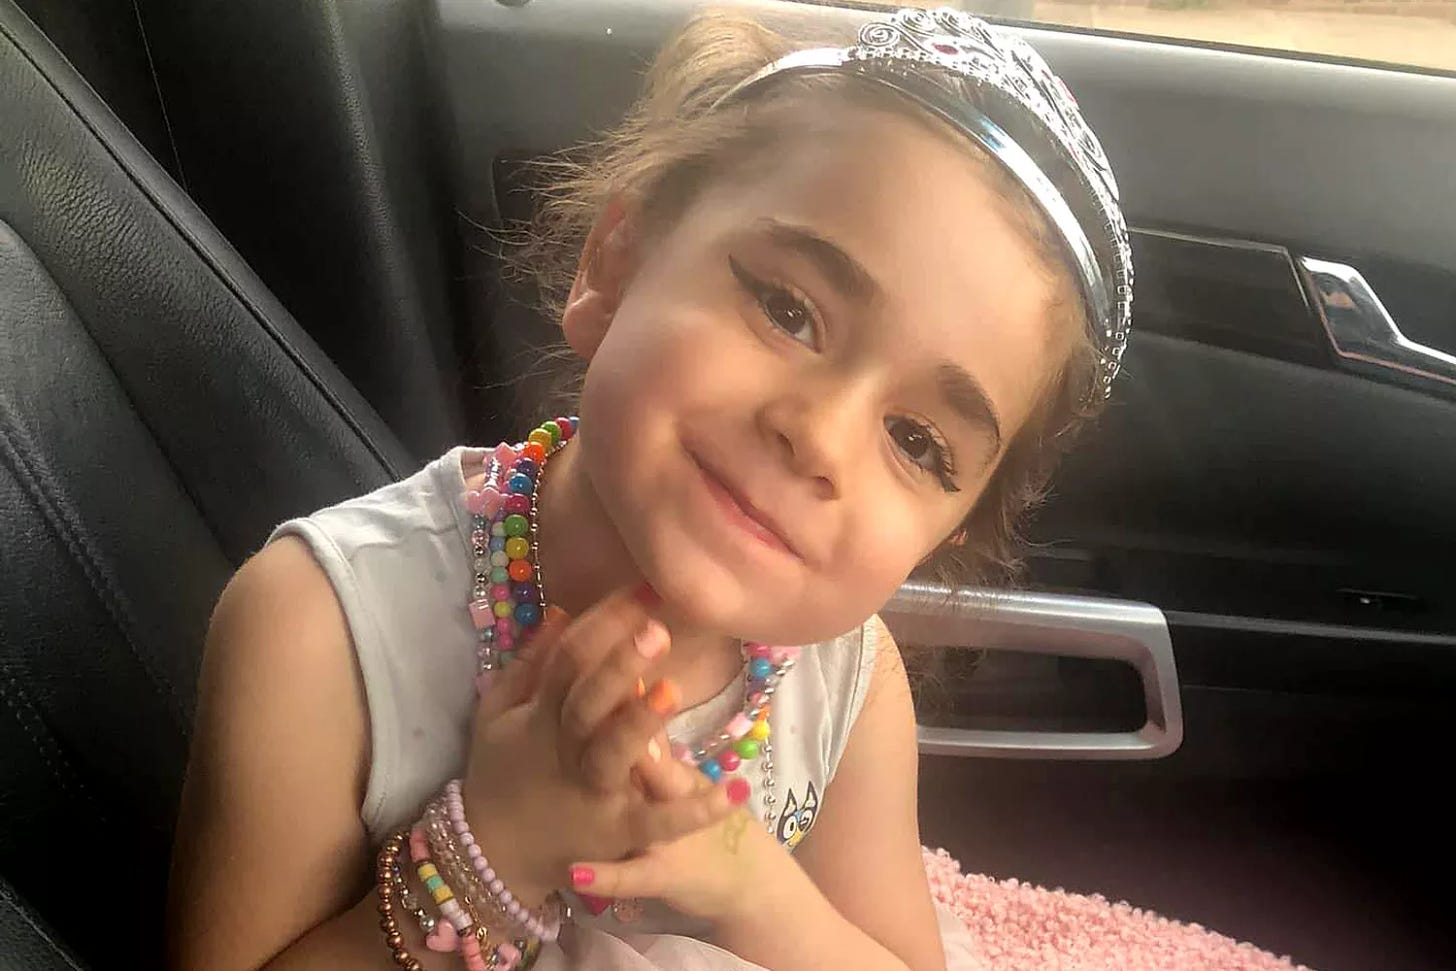 A family has been left devastated after their 5-year-old daughter died from what was initially believed to have been a common cold